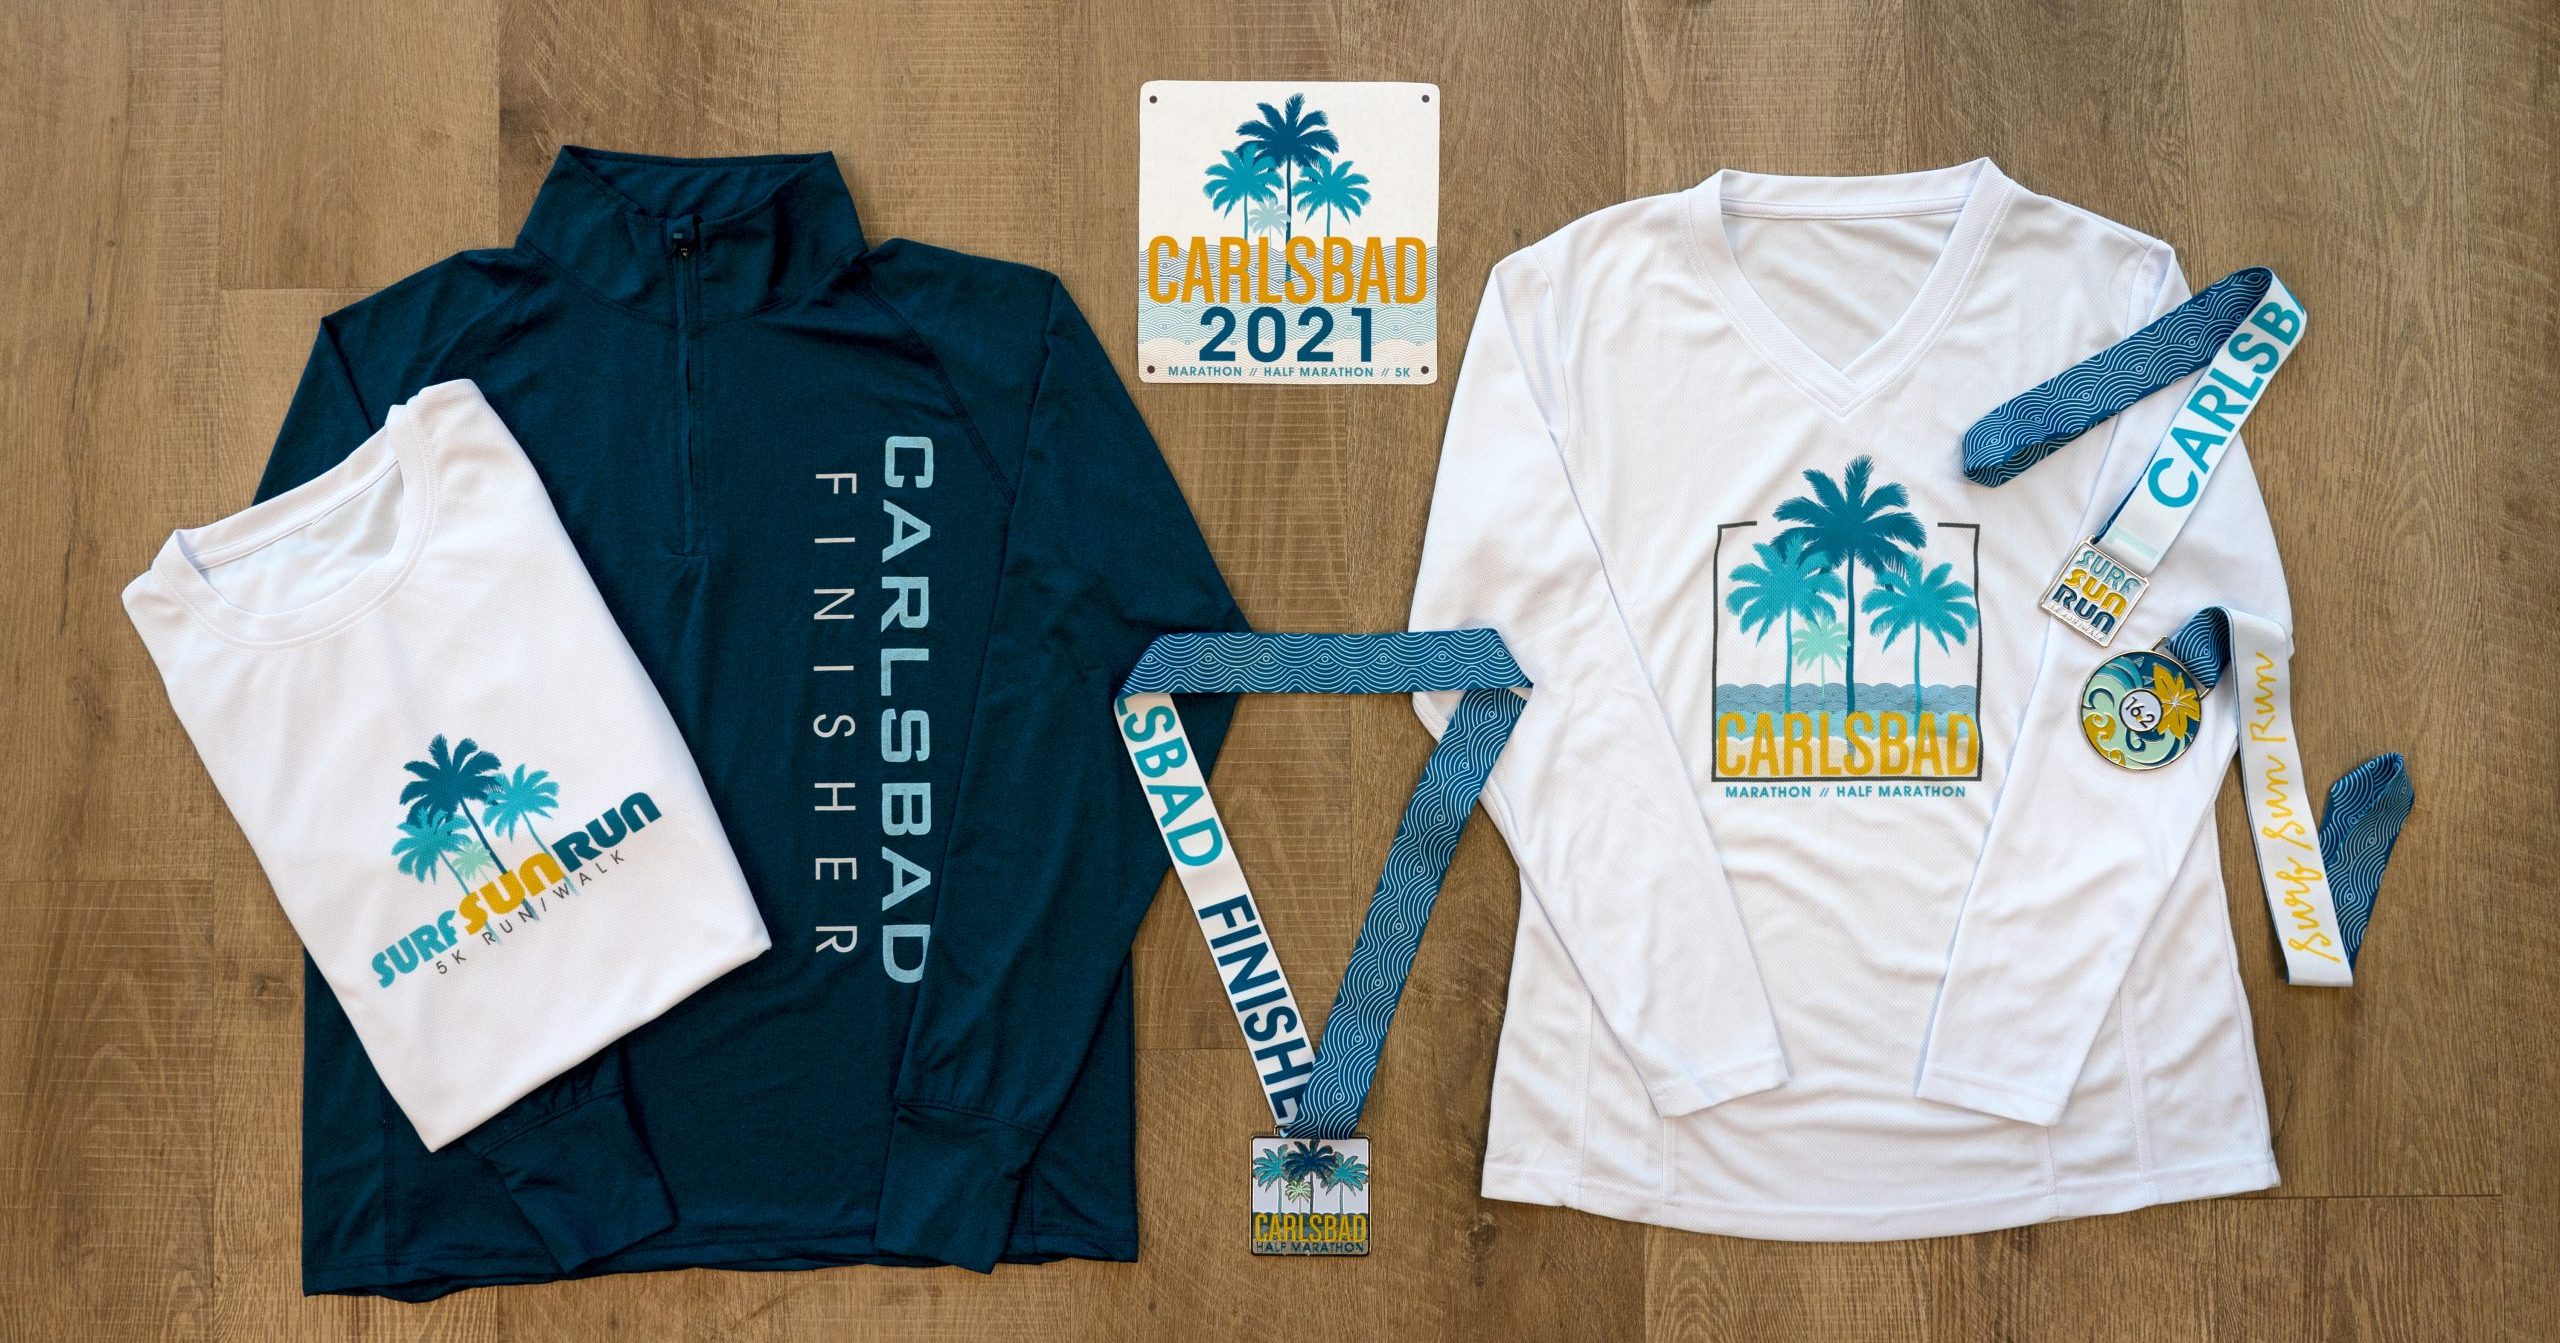 Happy 2021 It’s Carlsbad Marathon month! In Motion Events